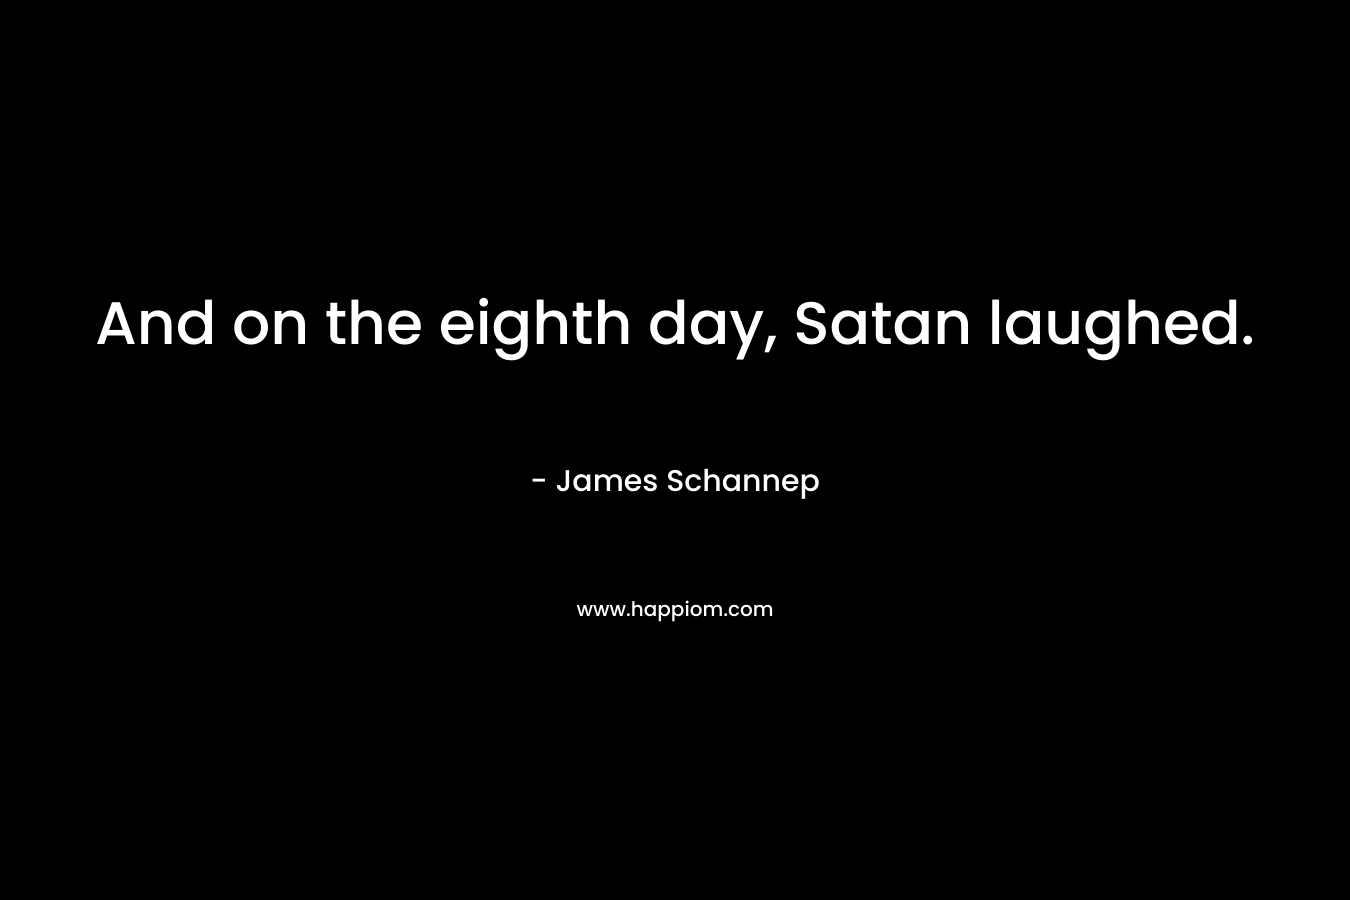 And on the eighth day, Satan laughed. – James Schannep